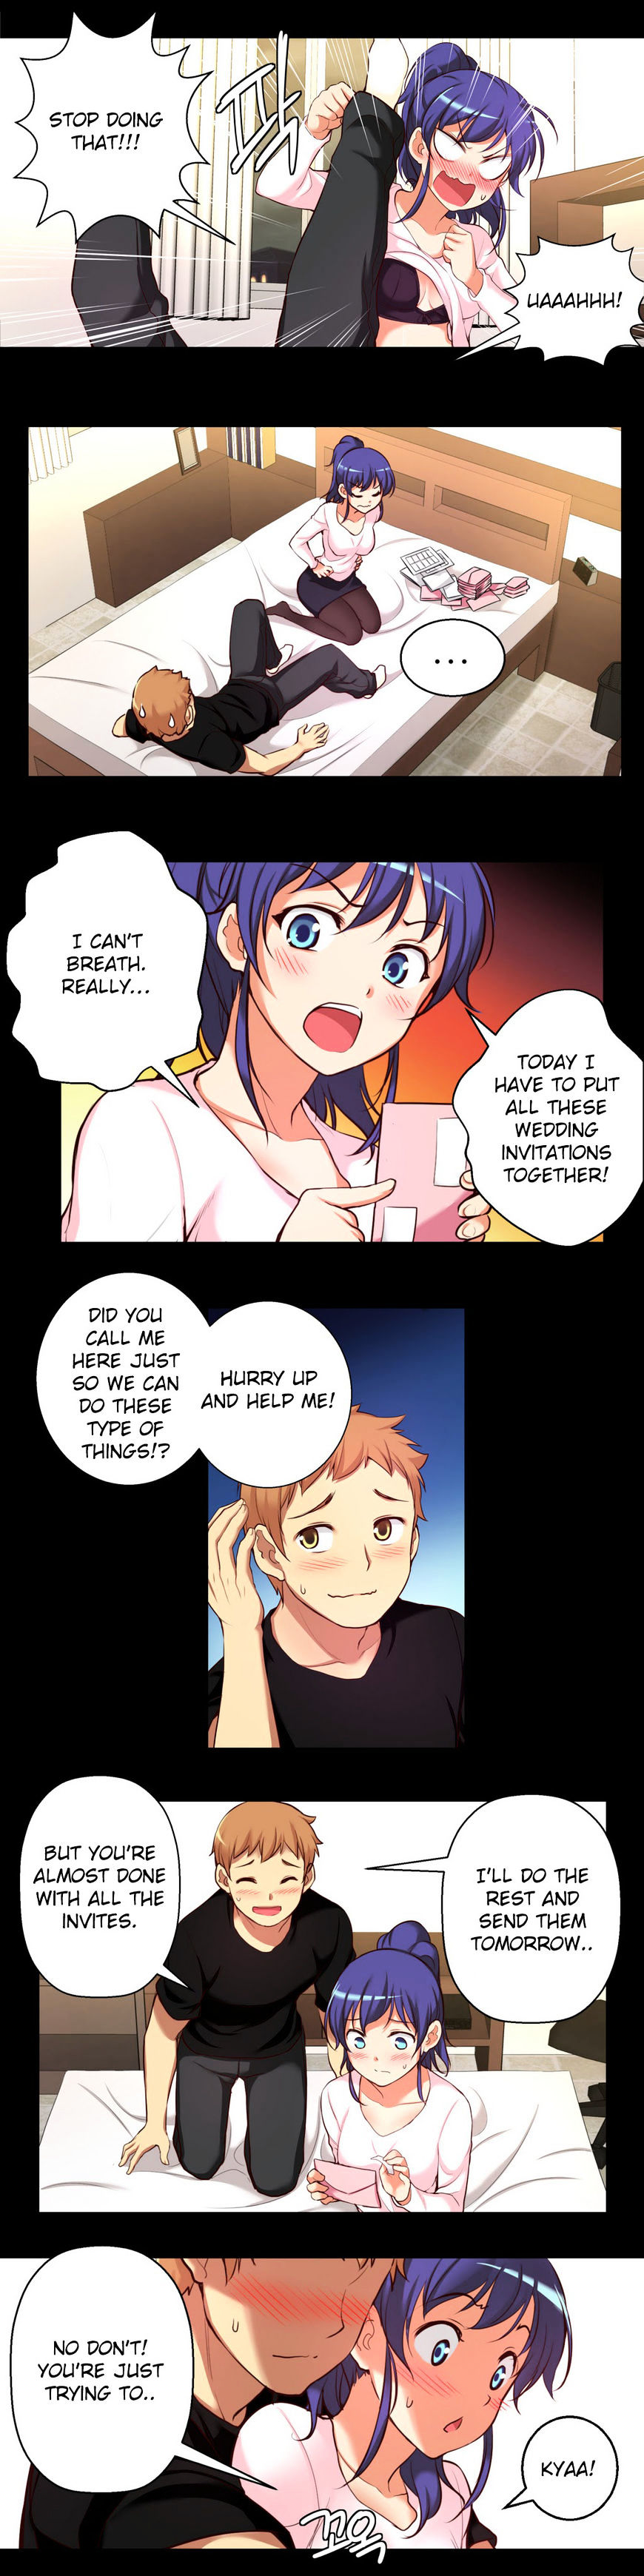 She Is Young - Page 2